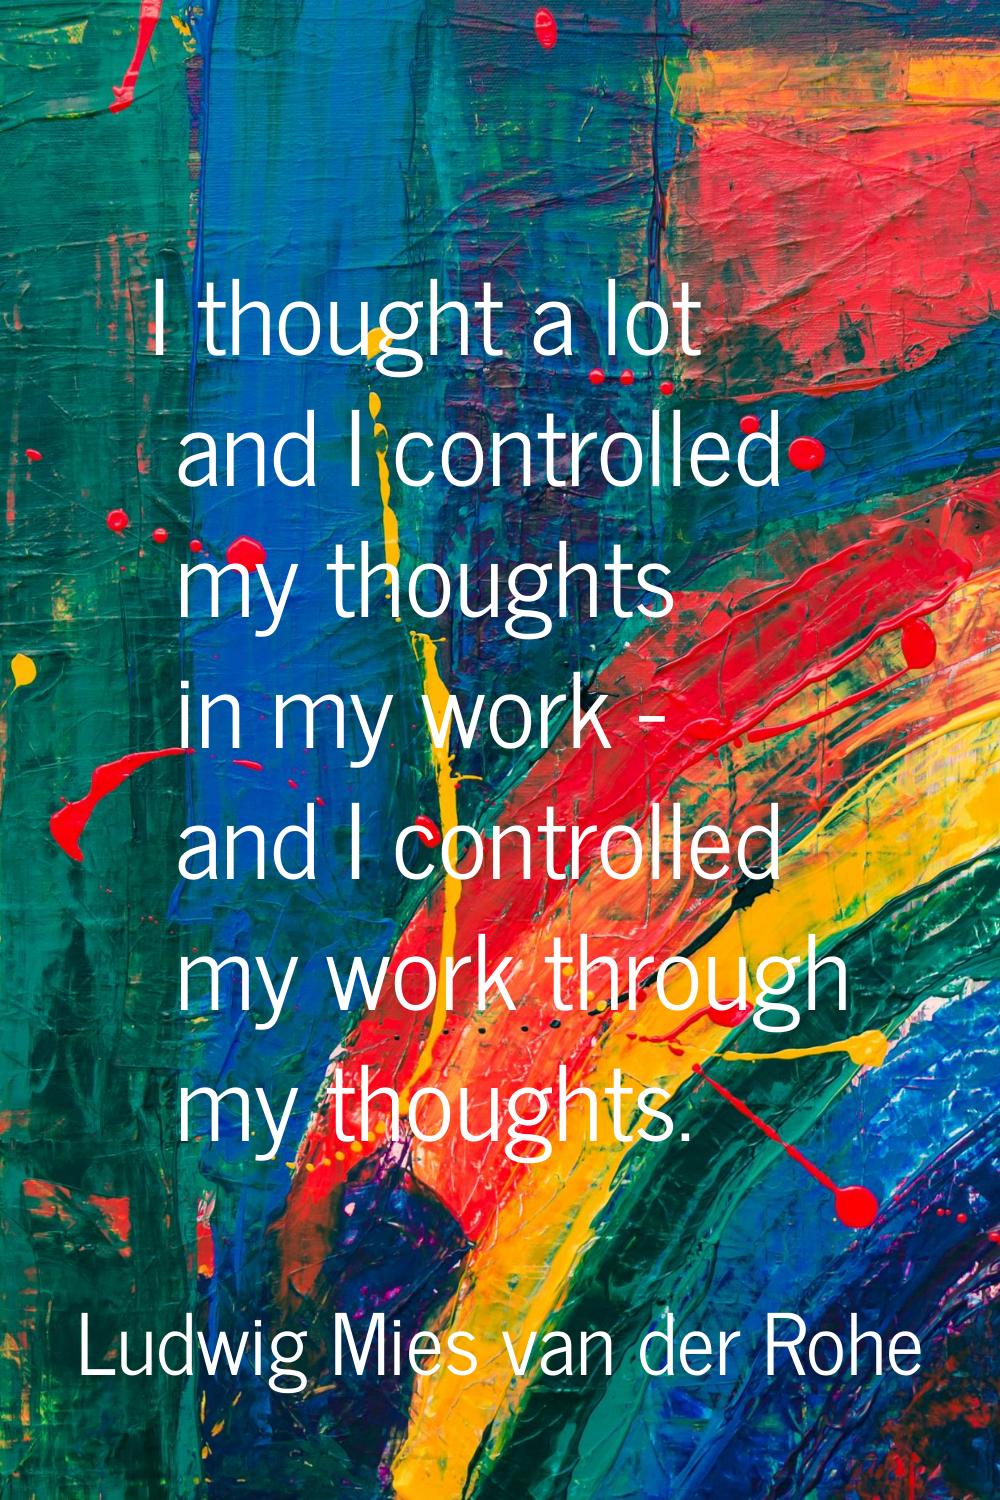 I thought a lot and I controlled my thoughts in my work - and I controlled my work through my thoug